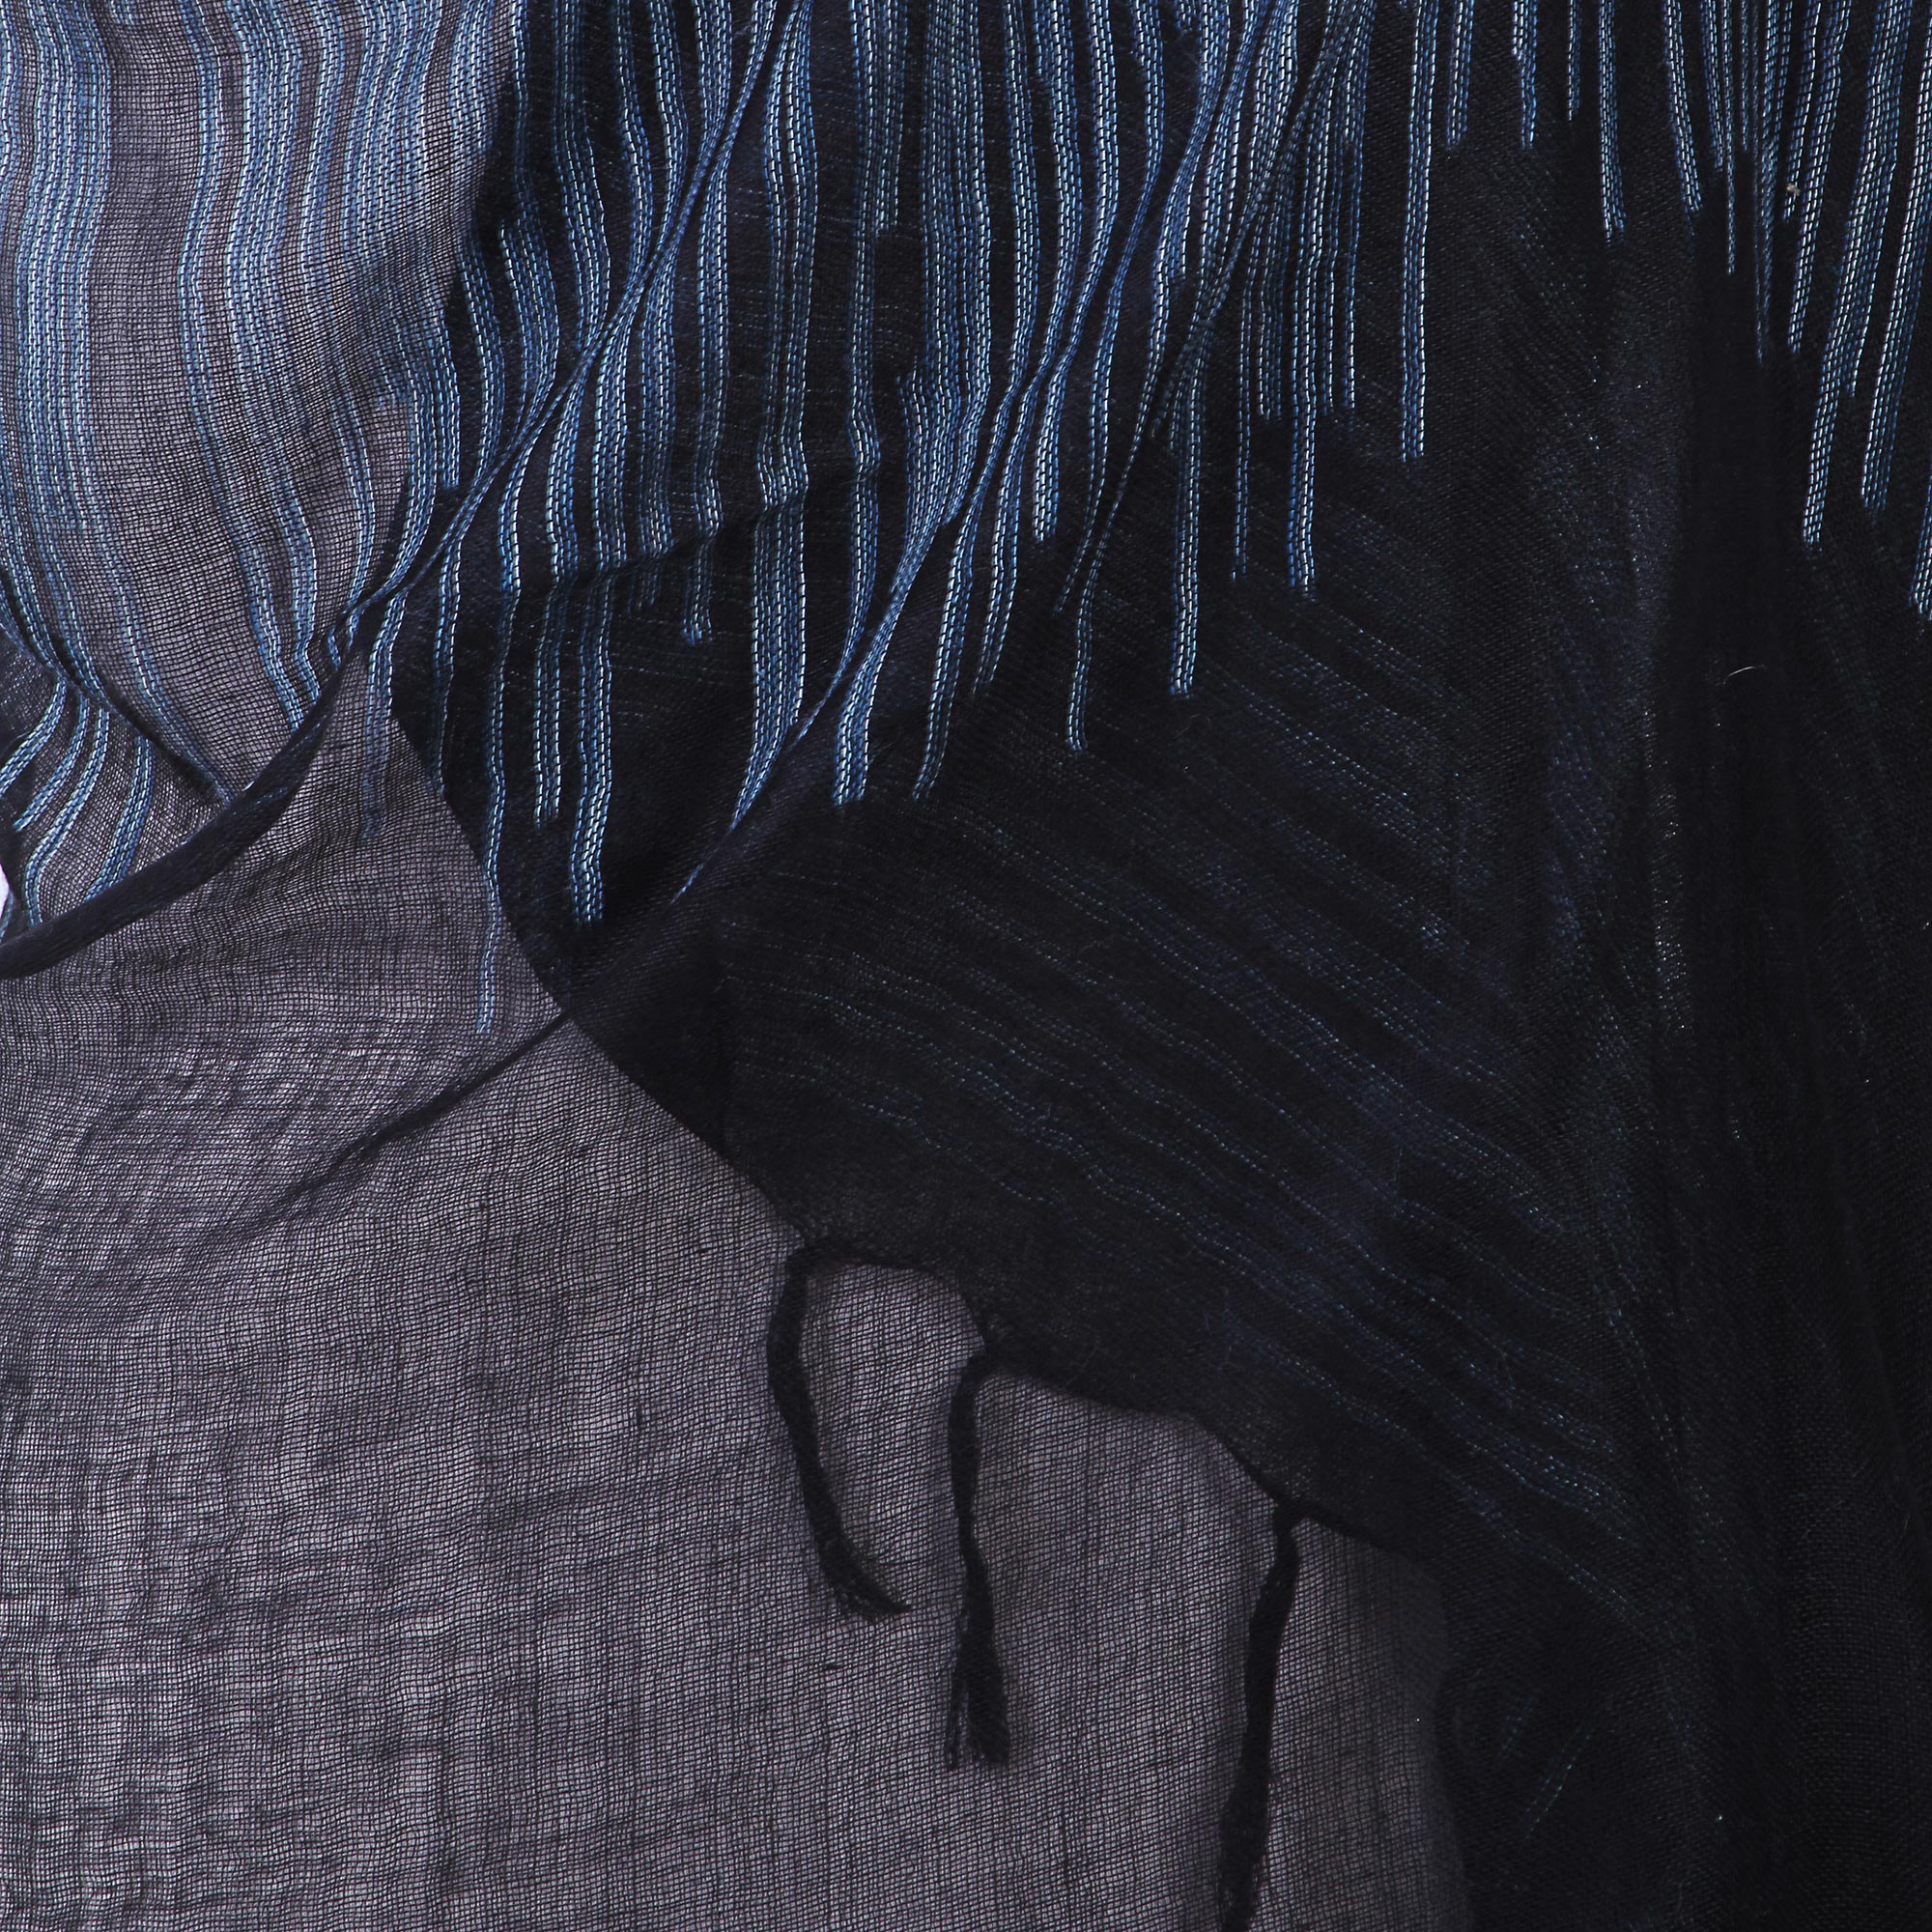 Deep Black, Blue, and Grey 100% Wool Woven Shawl from India - Magic ...